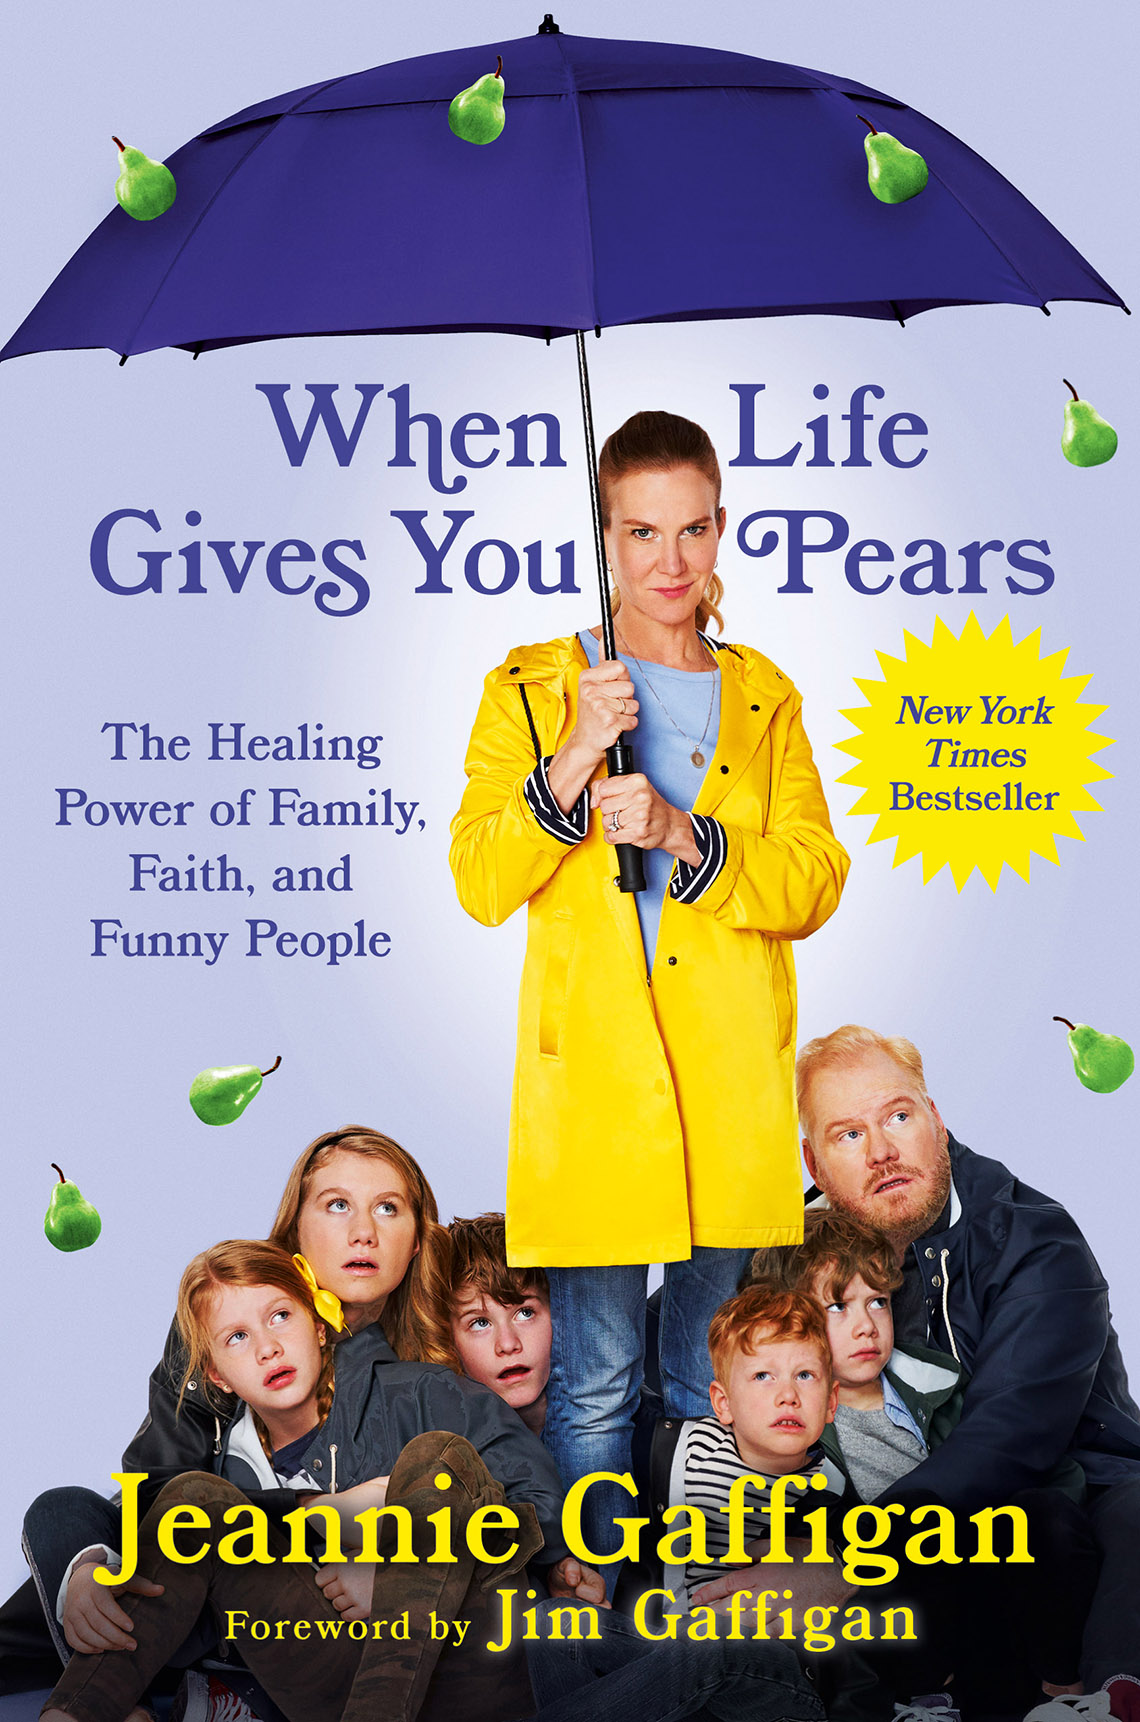 When life gives you pears book cover. Jeannie Gaffigan and family standing under a purple umbrella as it rains pears